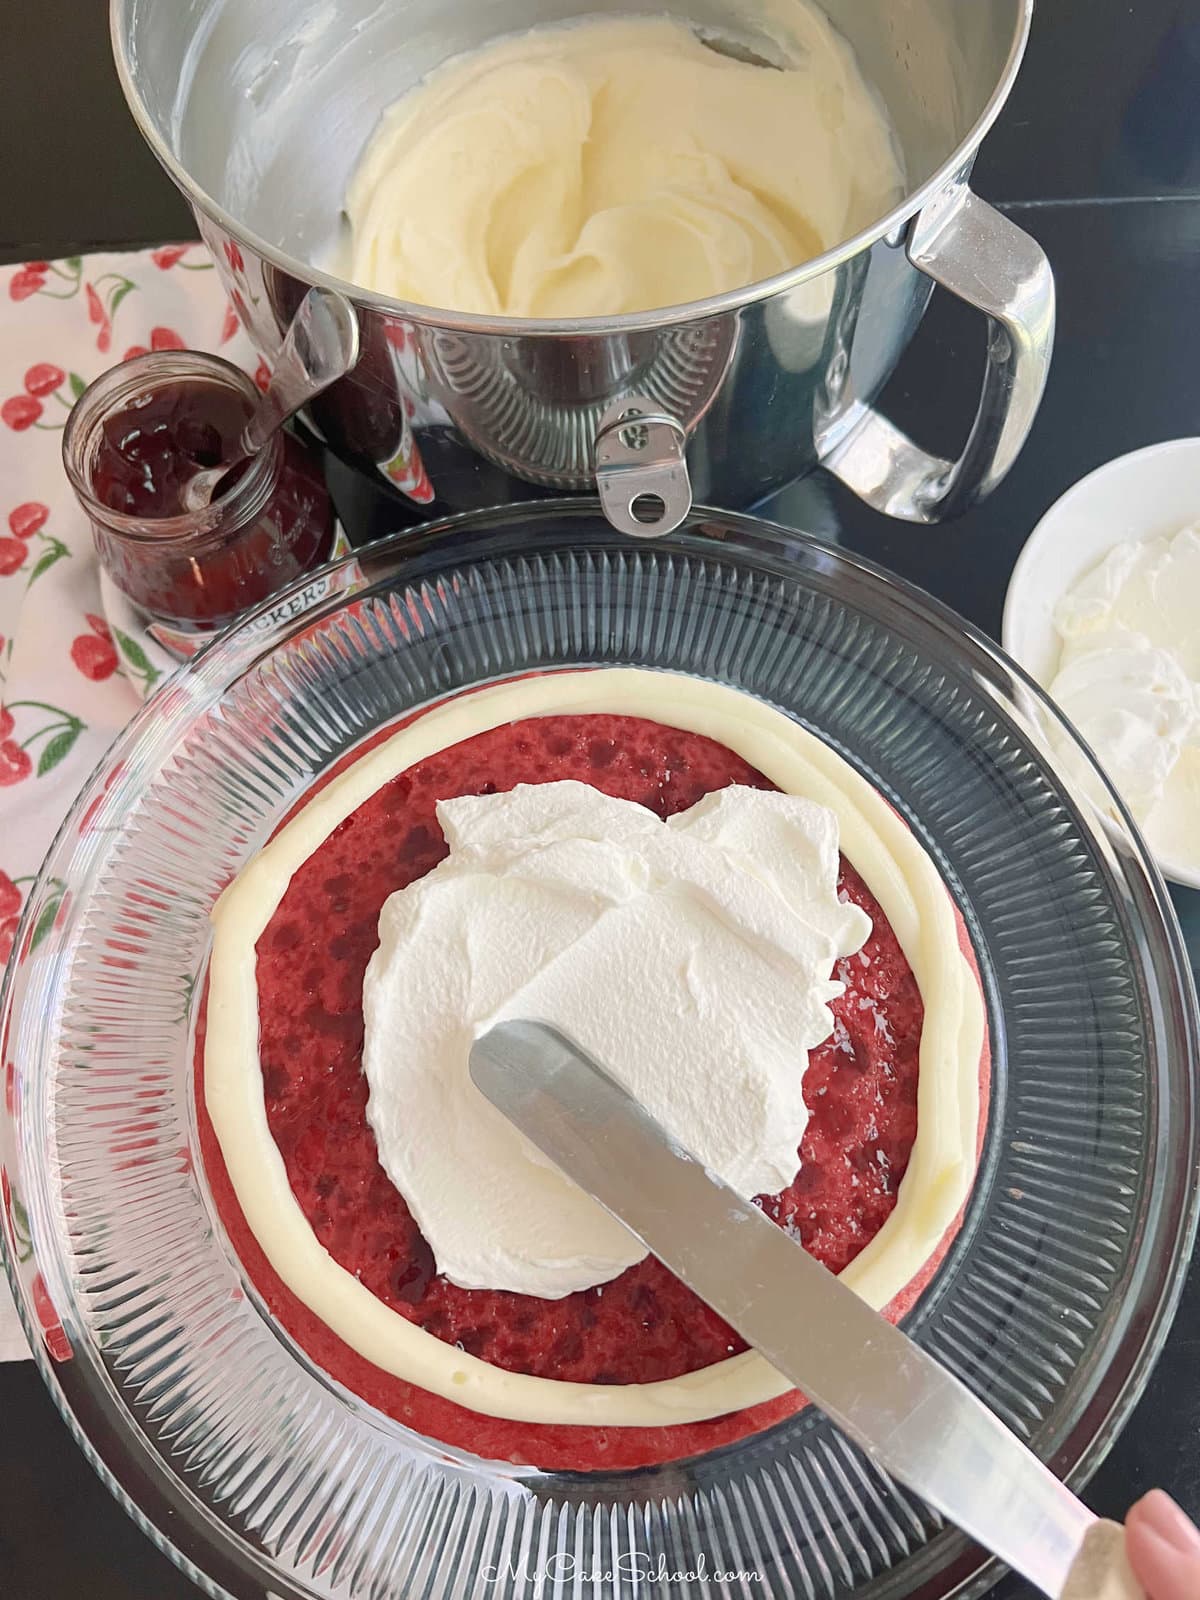 Spreading whipped cream filling over raspberry cake layer glazed with jam.